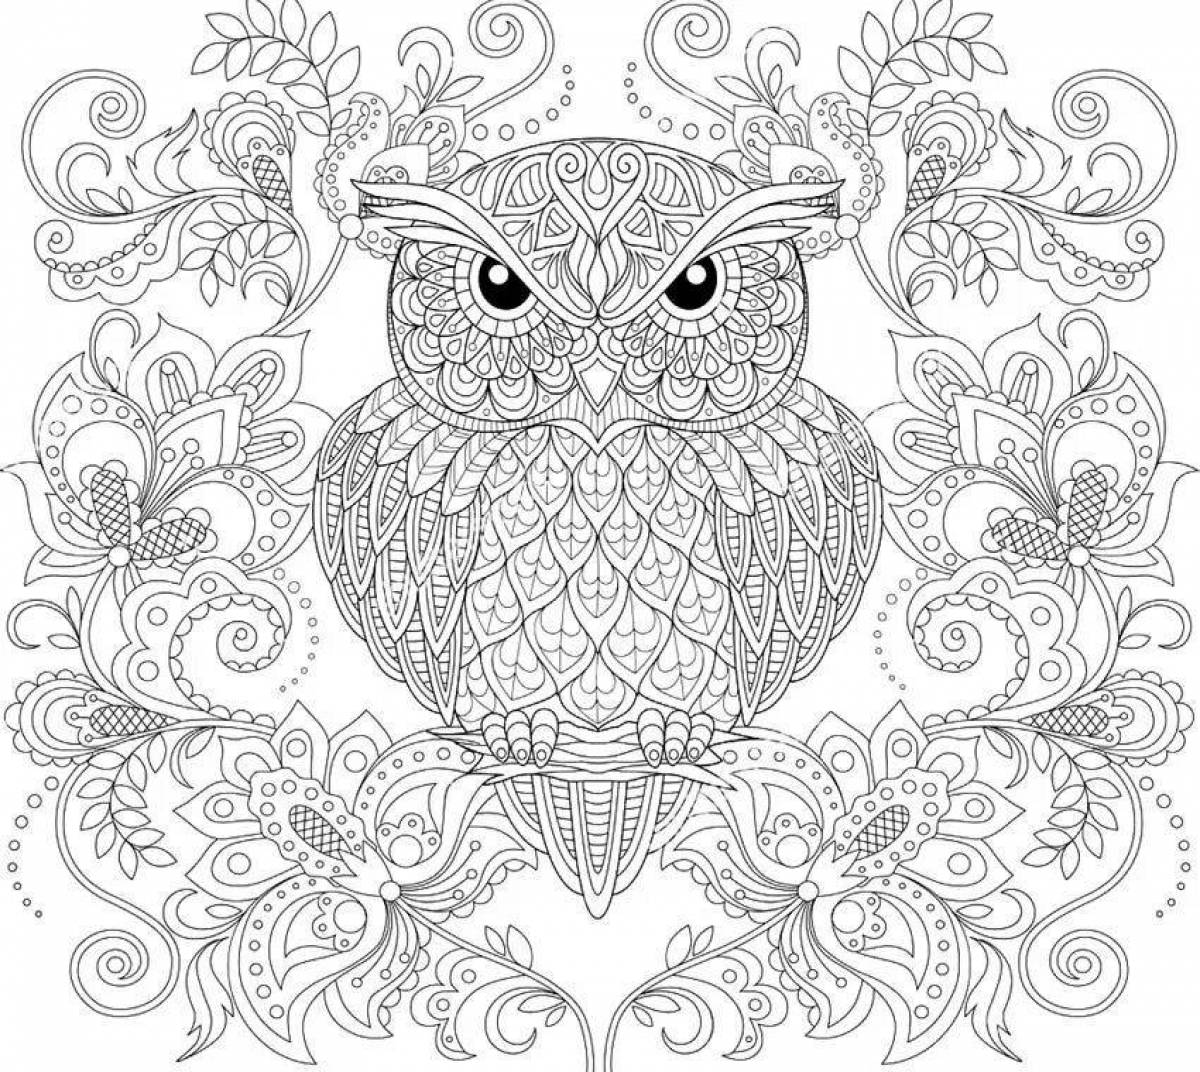 Exquisite owl coloring by numbers